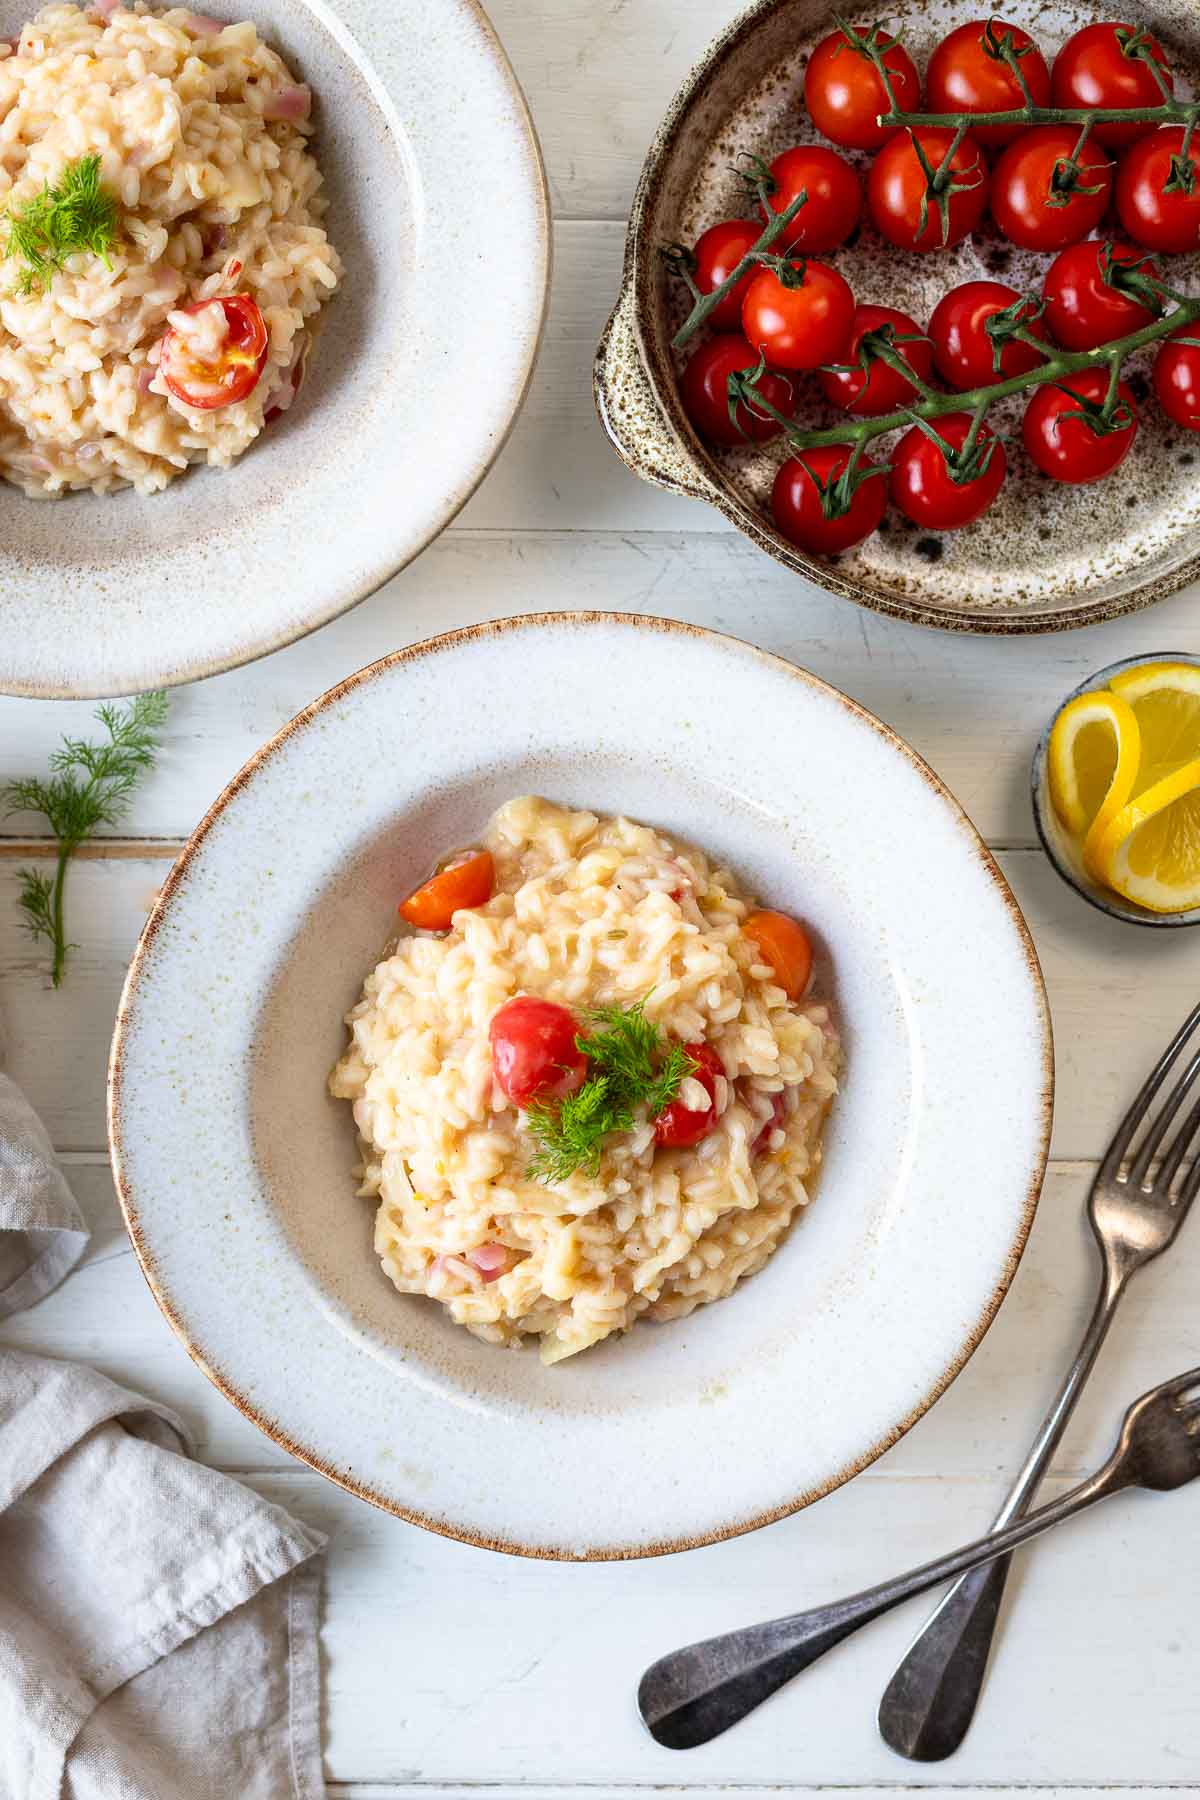 Lemon-Infused Fennel Risotto with Cherry Tomatoes